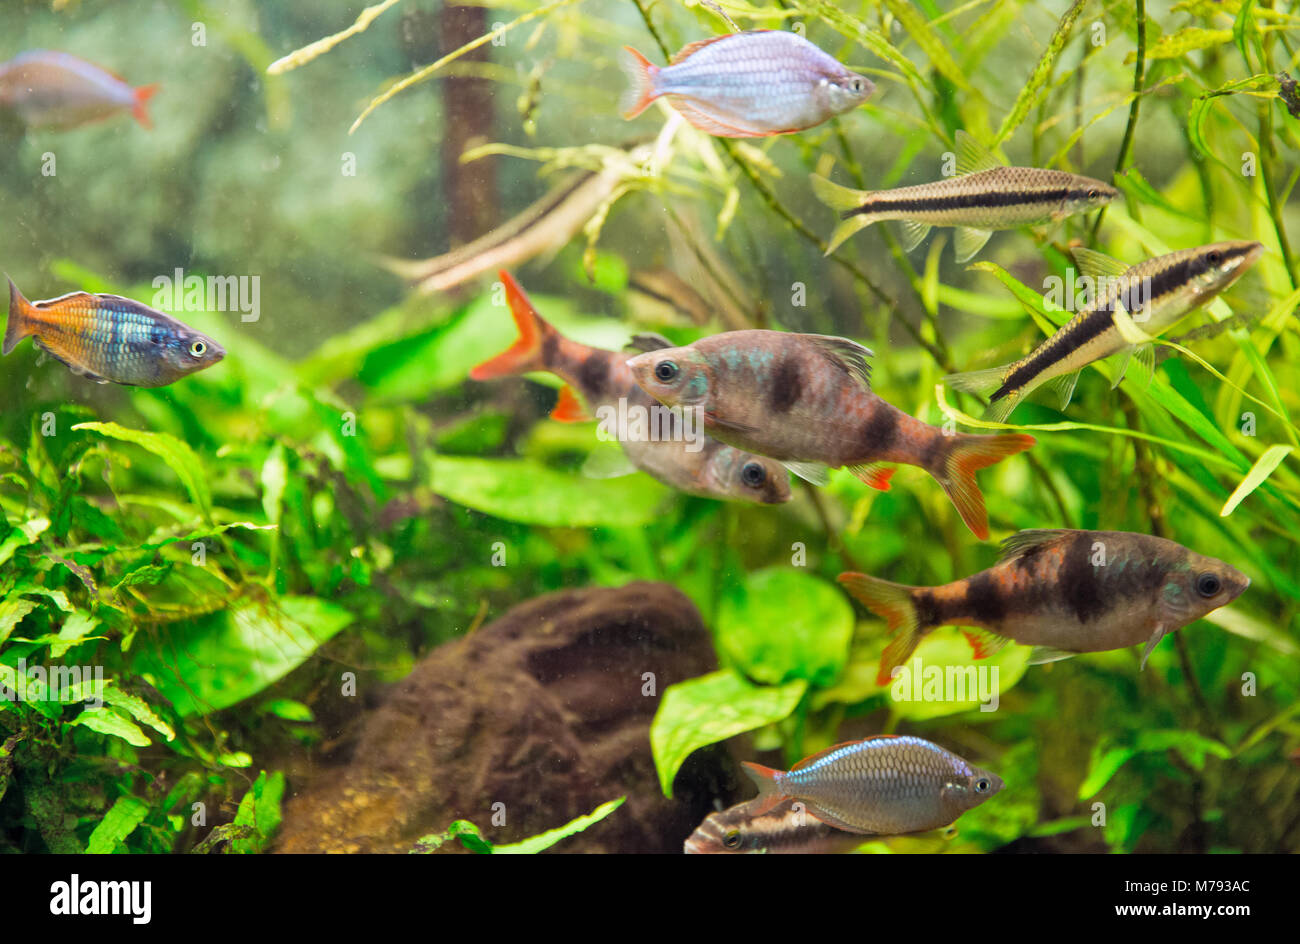 decorative aquarium colourfull fishes and water plants in deep water Stock Photo